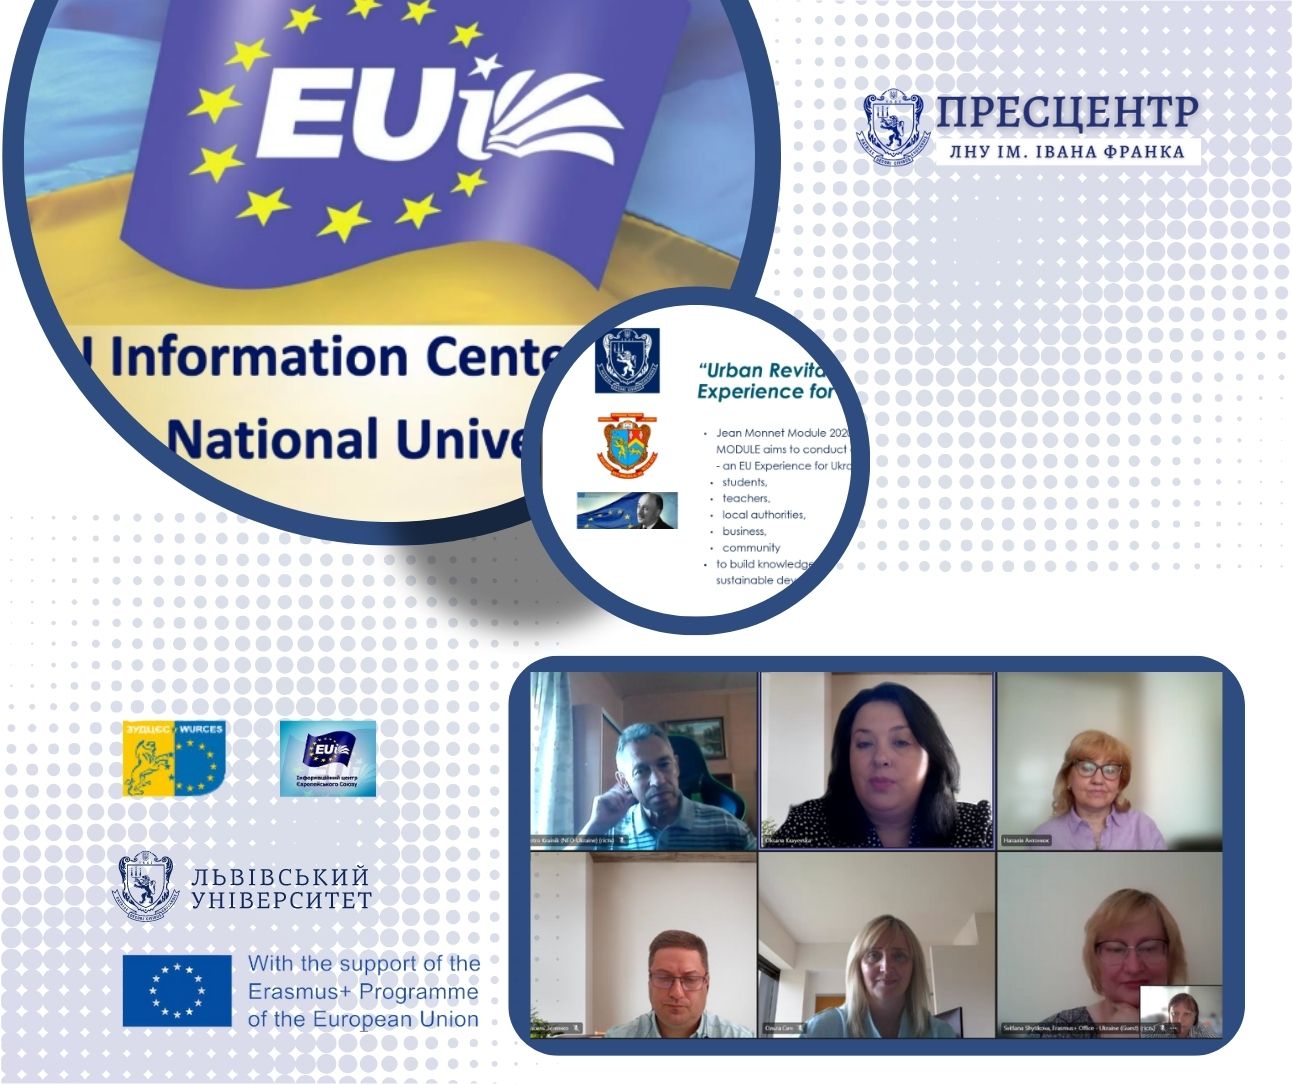 The IV international workshop “Disciplinary challenges in the field of European integration: the experience of post-socialist countries” was held